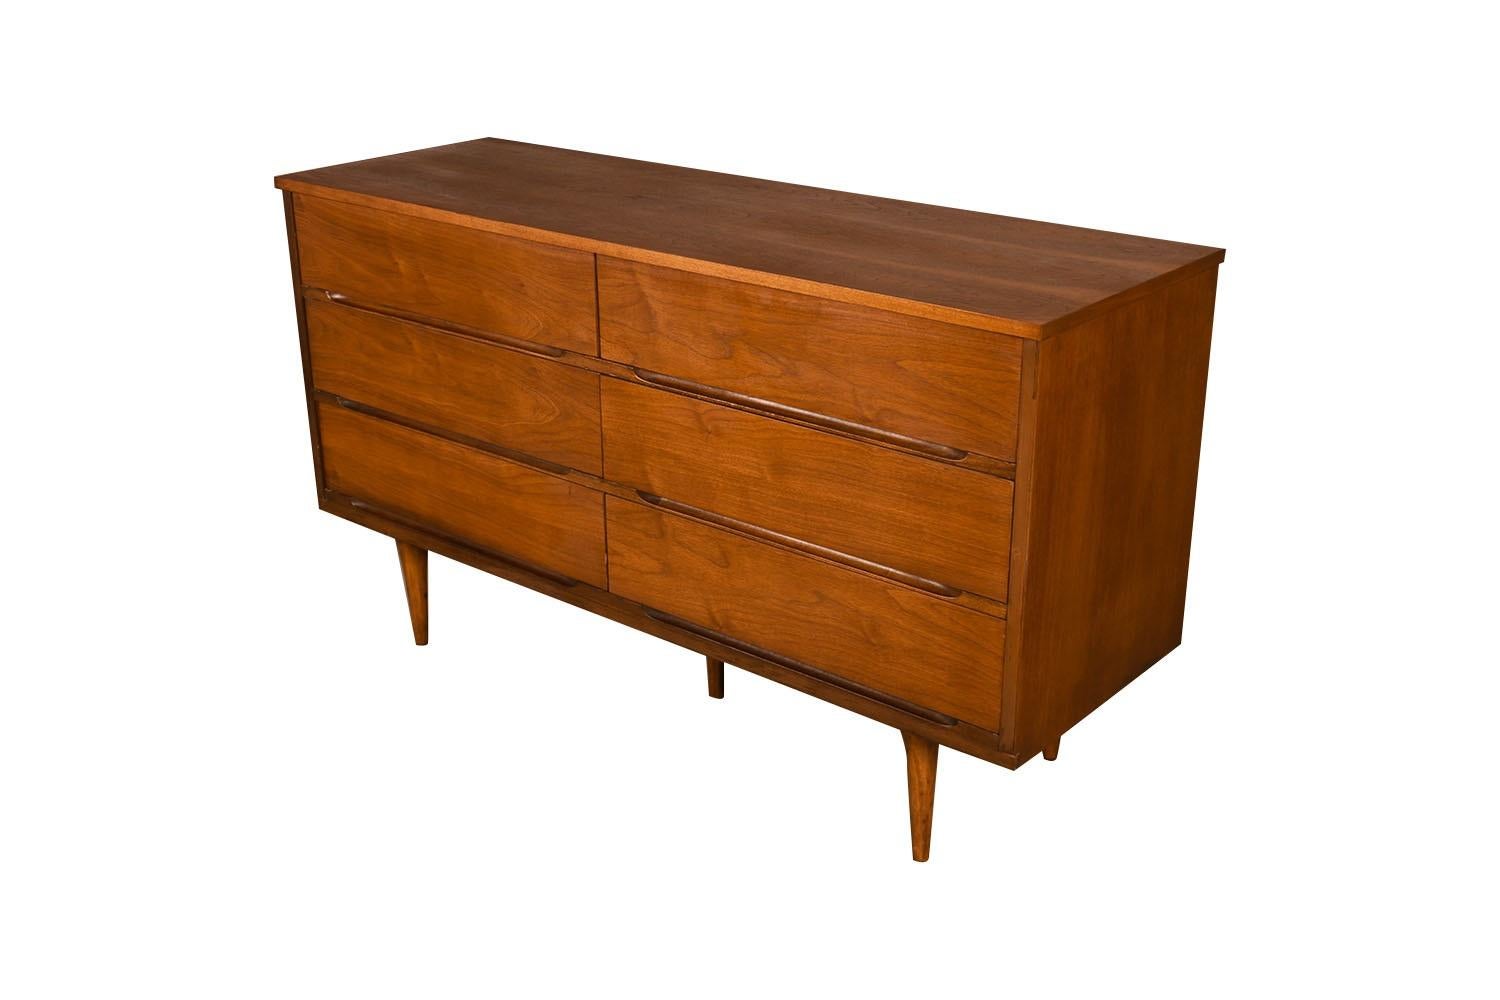 Attractive long mid-century modern sleek smooth face 6 drawer dresser. This is a very simple yet modern 6 drawer design. Each drawer has beautiful medium tone stunning walnut grains with minimal inset pulls. At the pull of the 6 drawers, you will